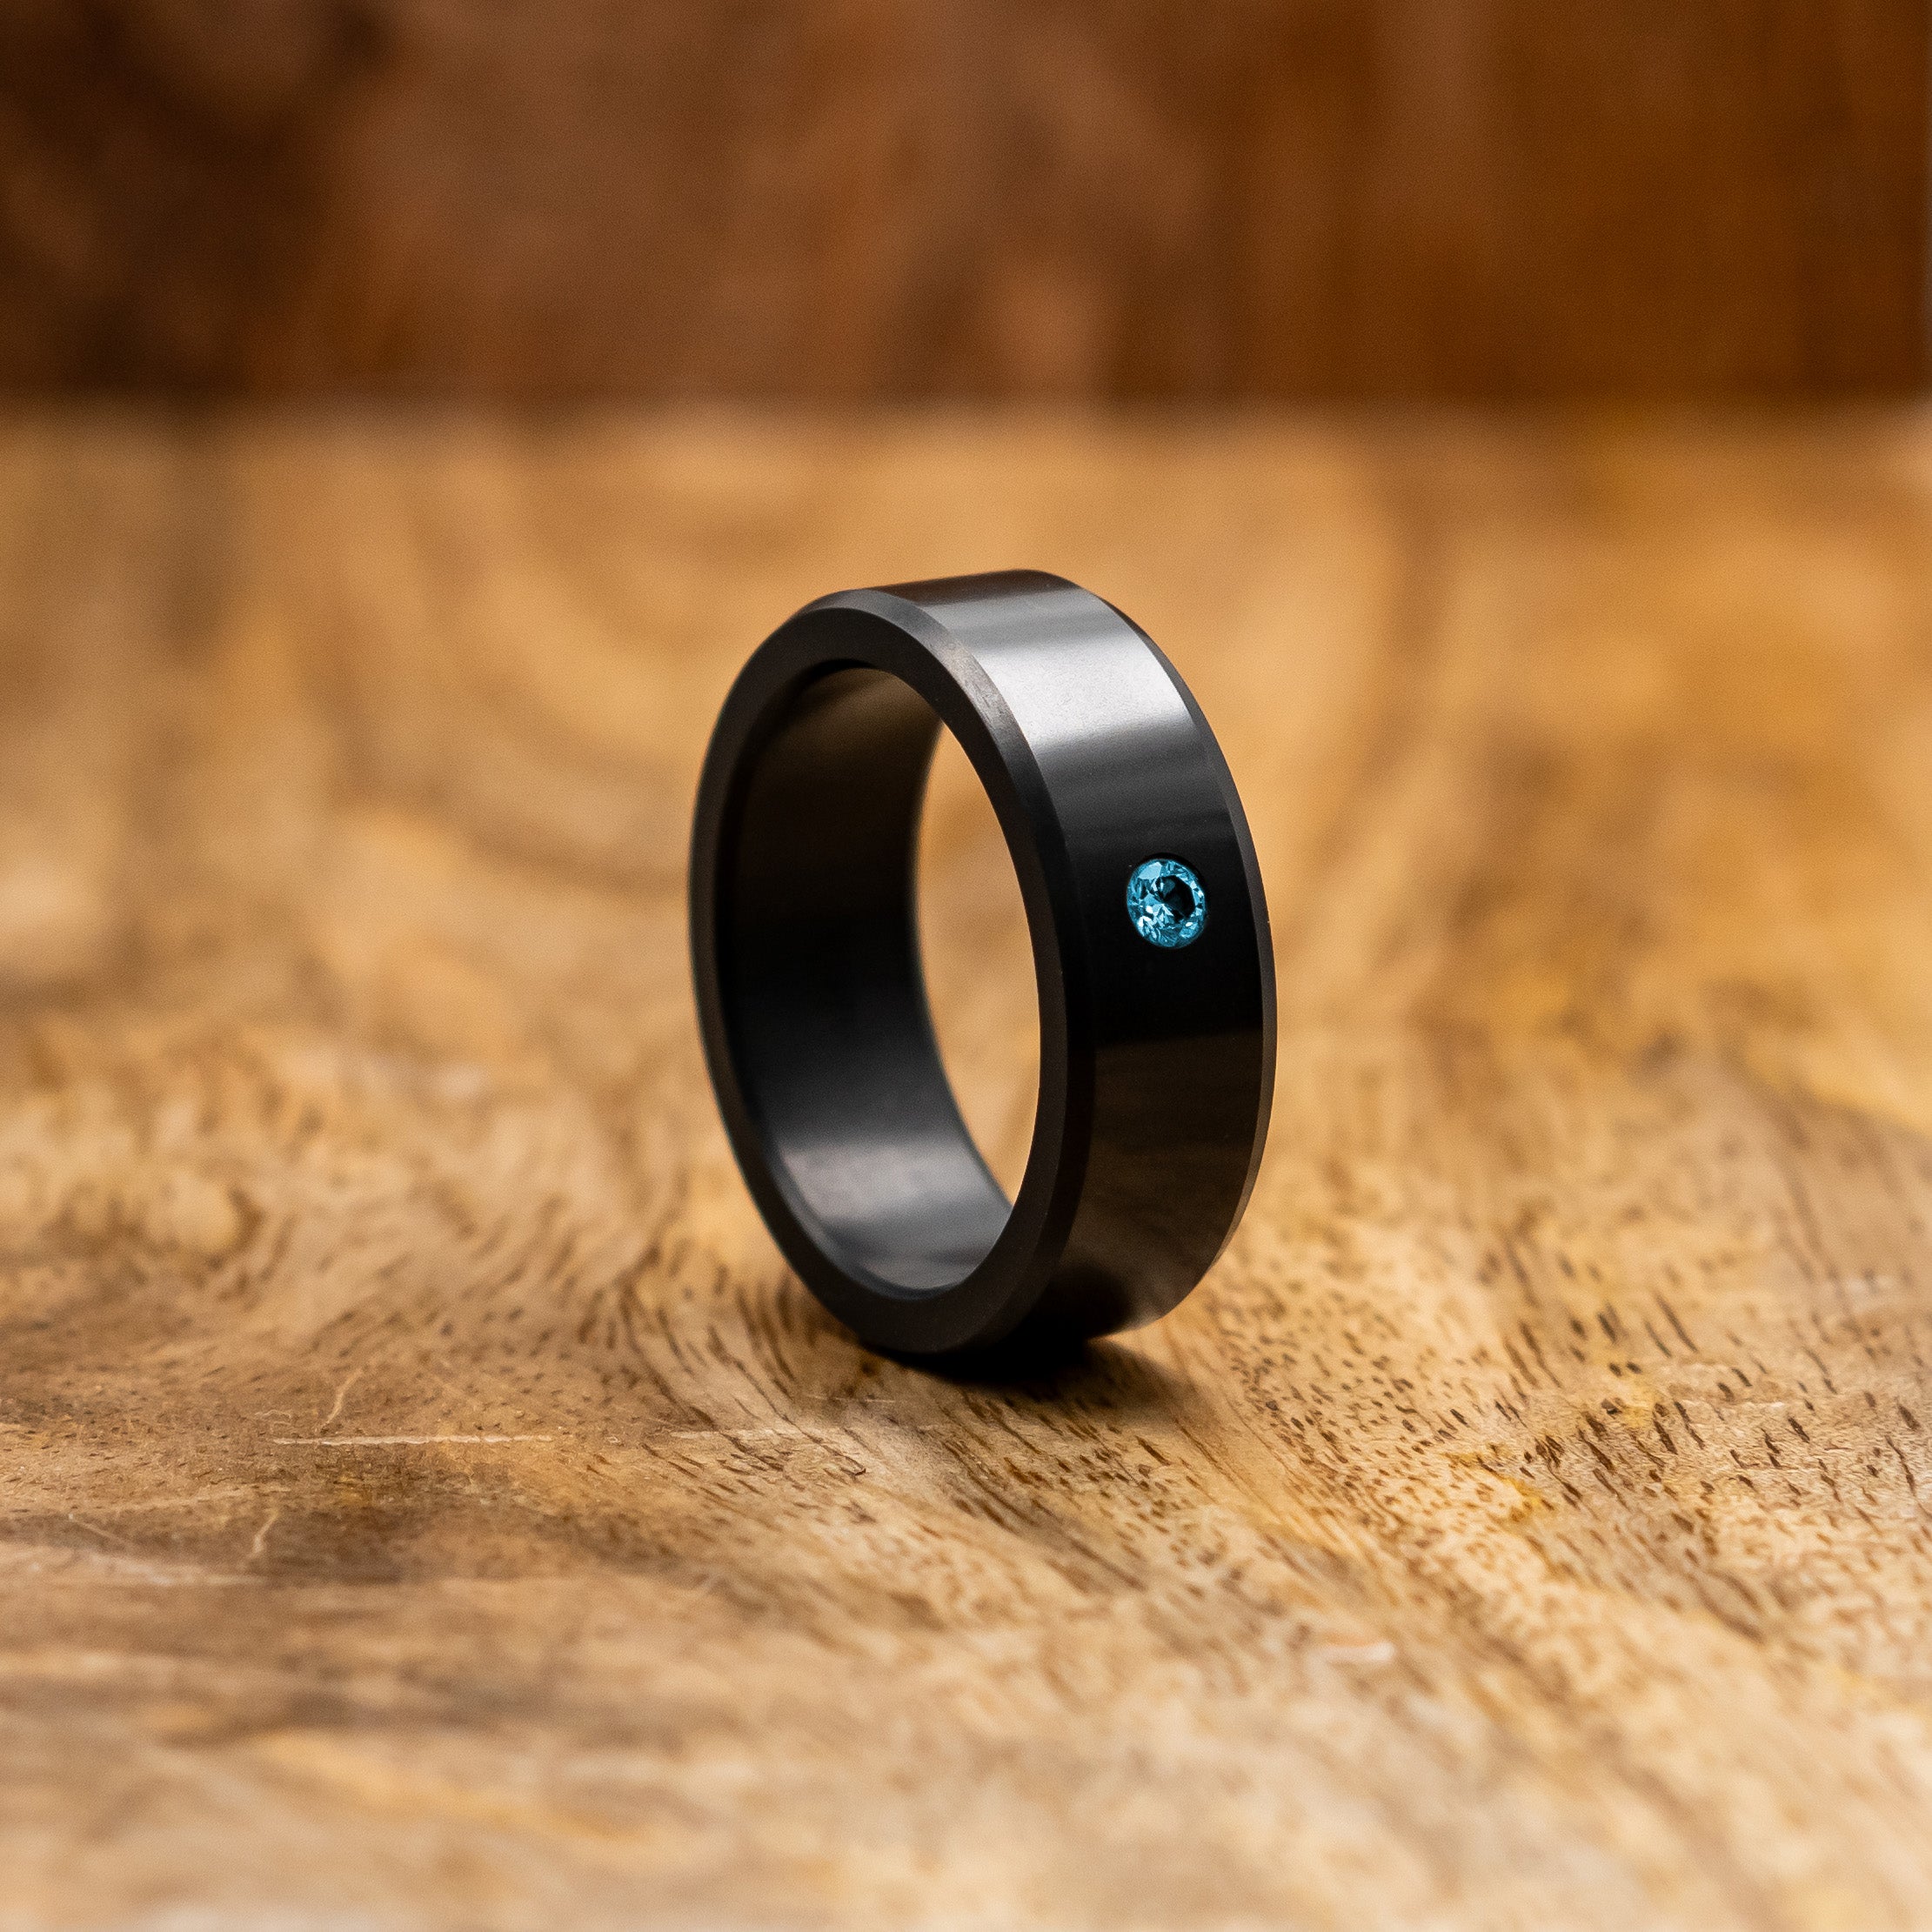 Ring shot #1 of our Elysium ARES Men's Black Diamond & Blue Diamond Inset resting on a wood surface | ElysiumBlack.com | Men’s Blue Diamond Wedding Rings